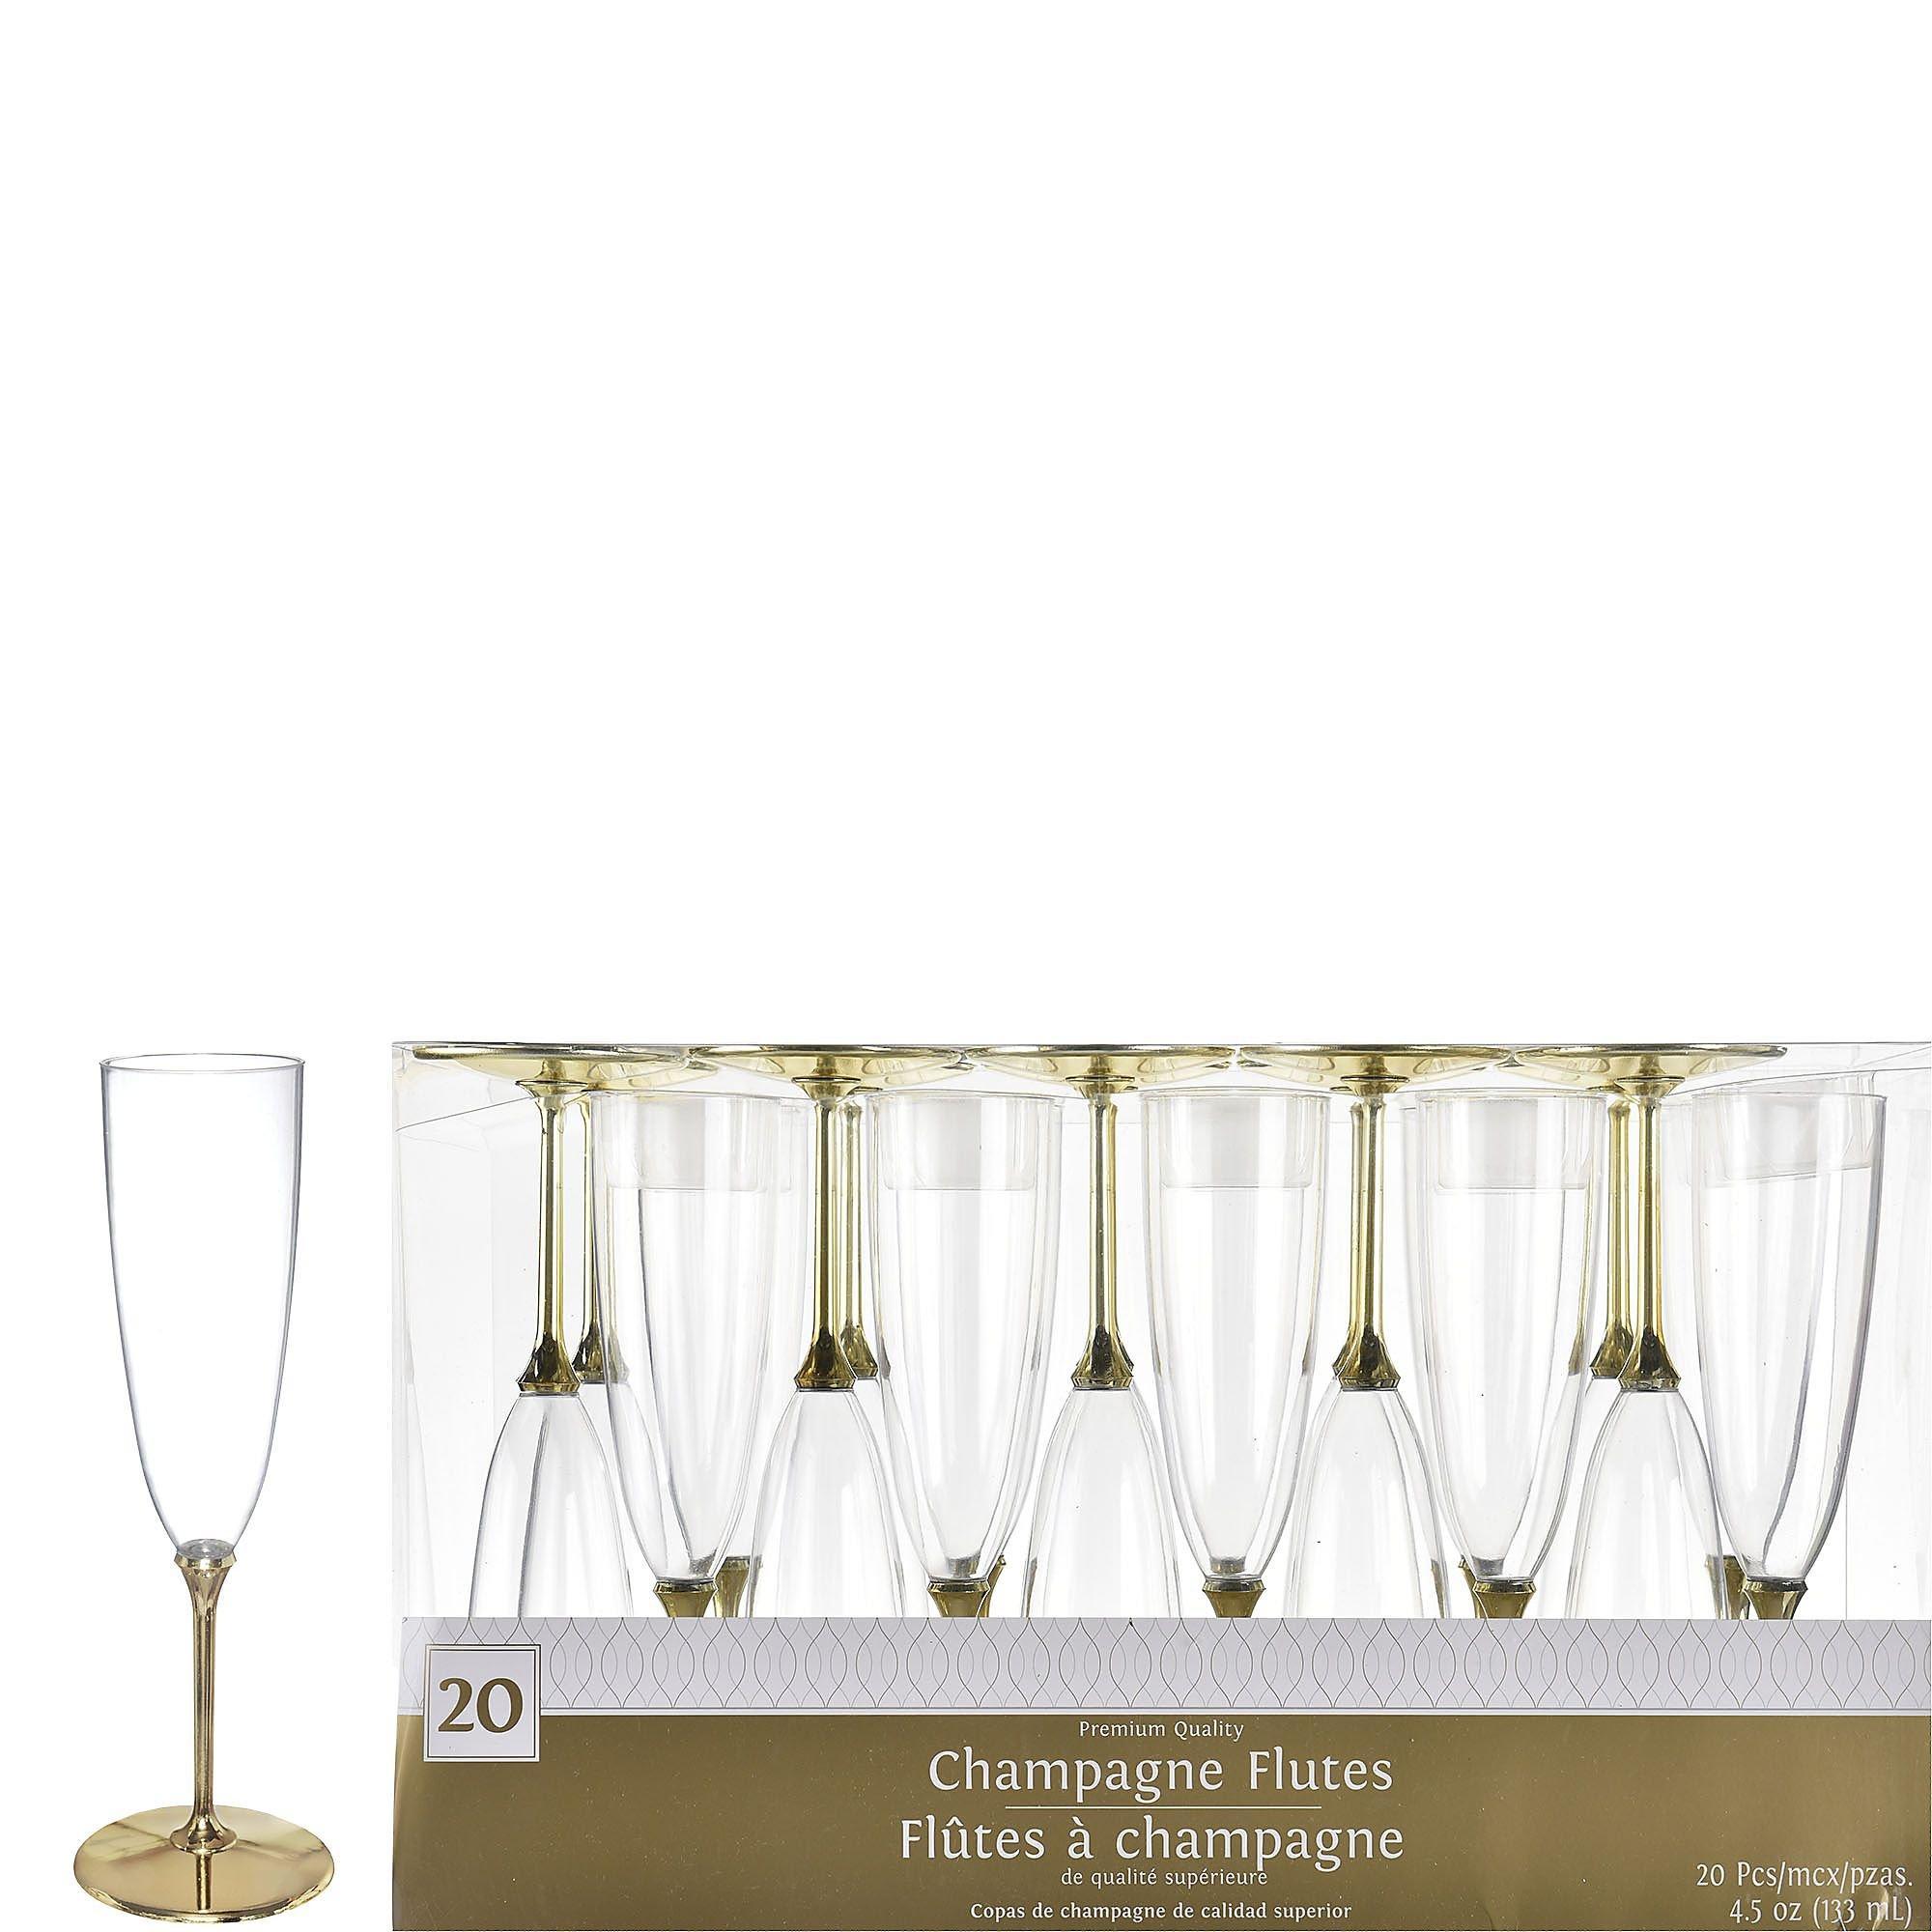 Gala Crystal Champagne Flute by World Market